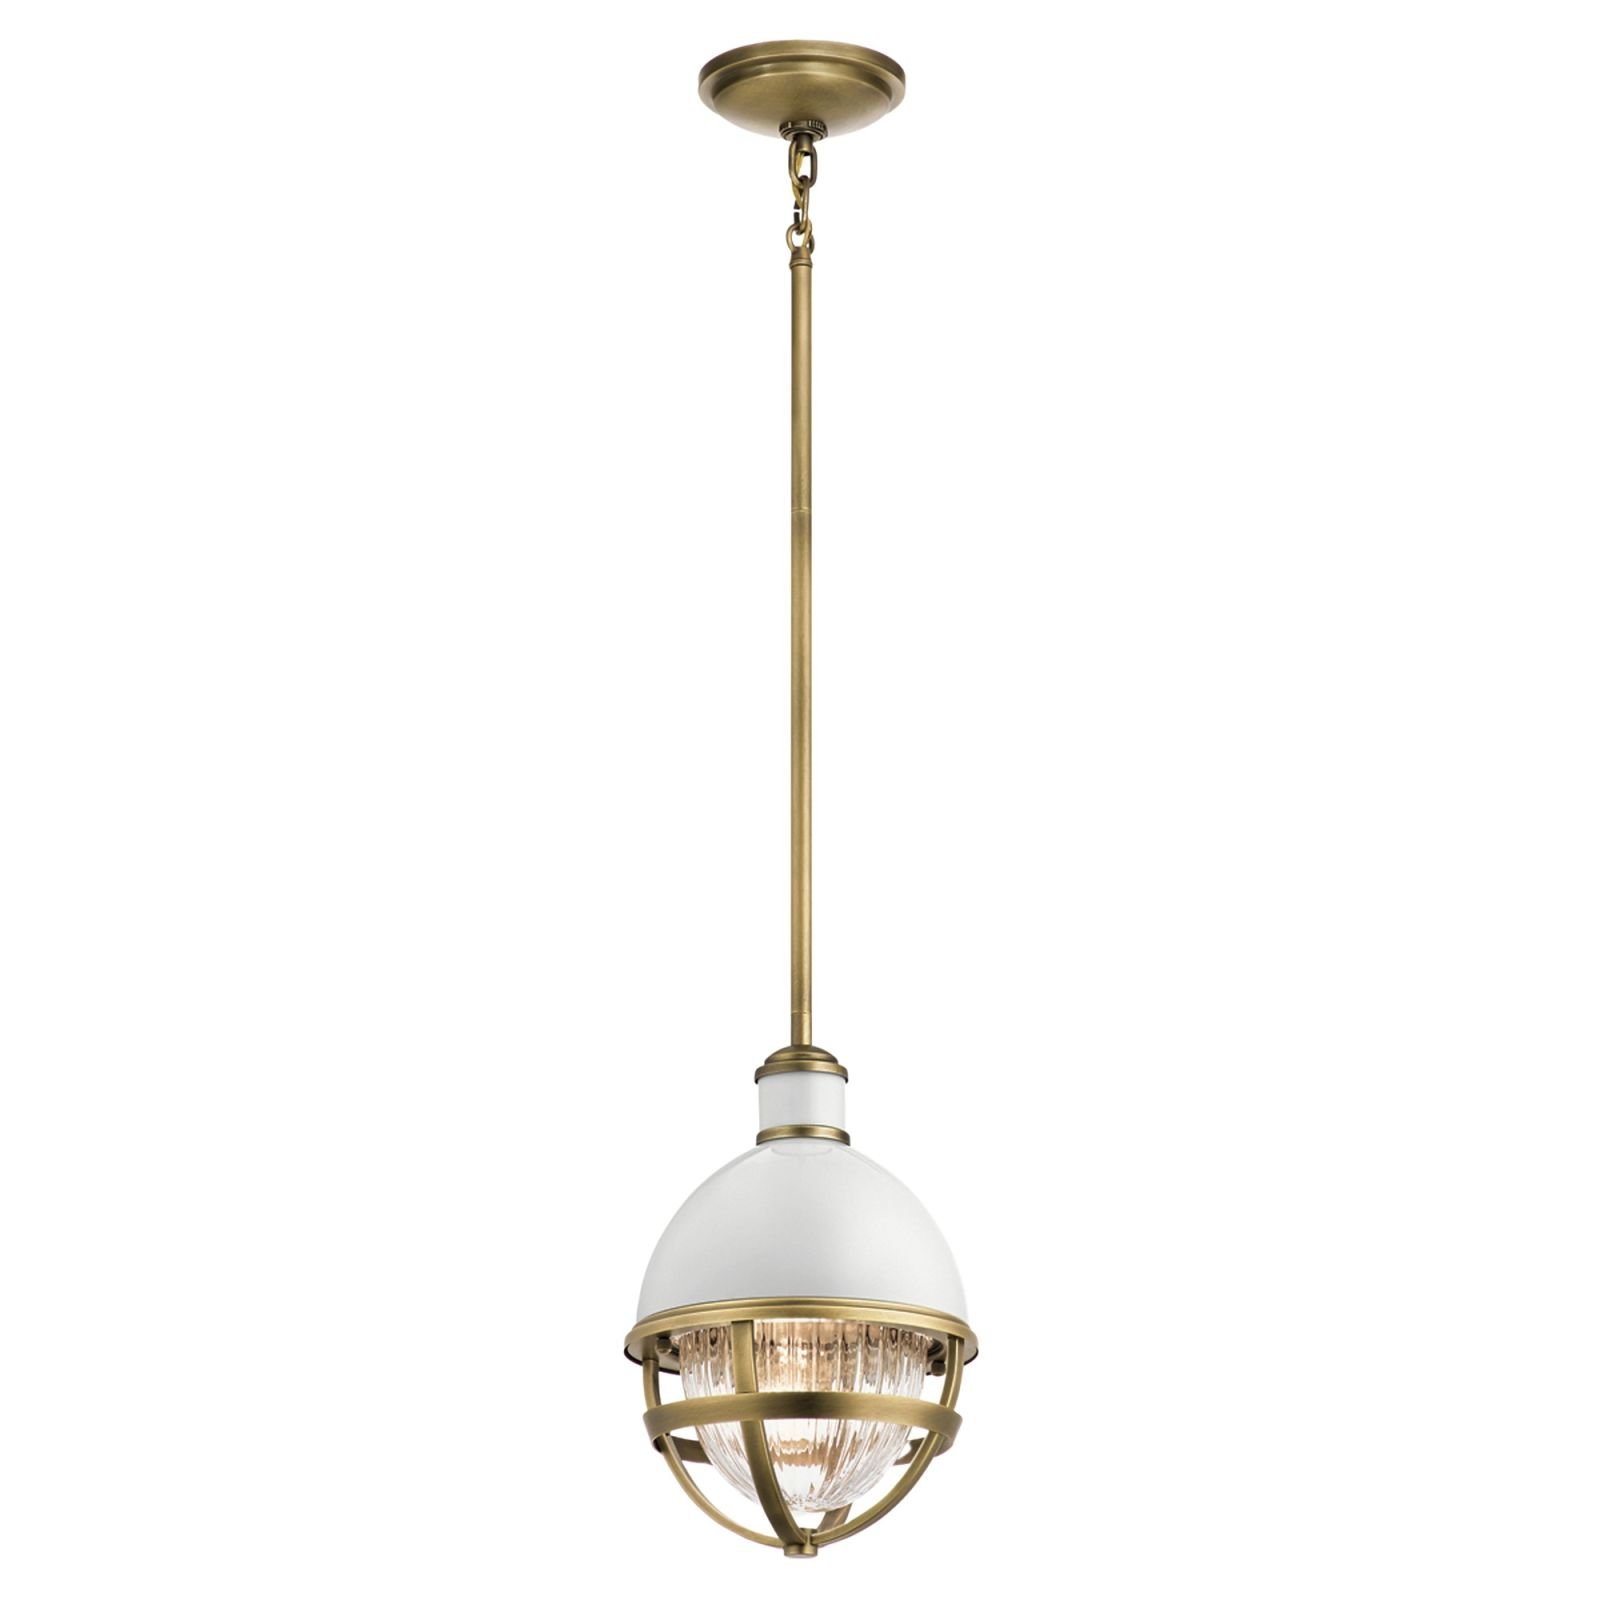 Tollis Mini Ceiling pendant in a choice of Natural Brass or Brushed Nickel